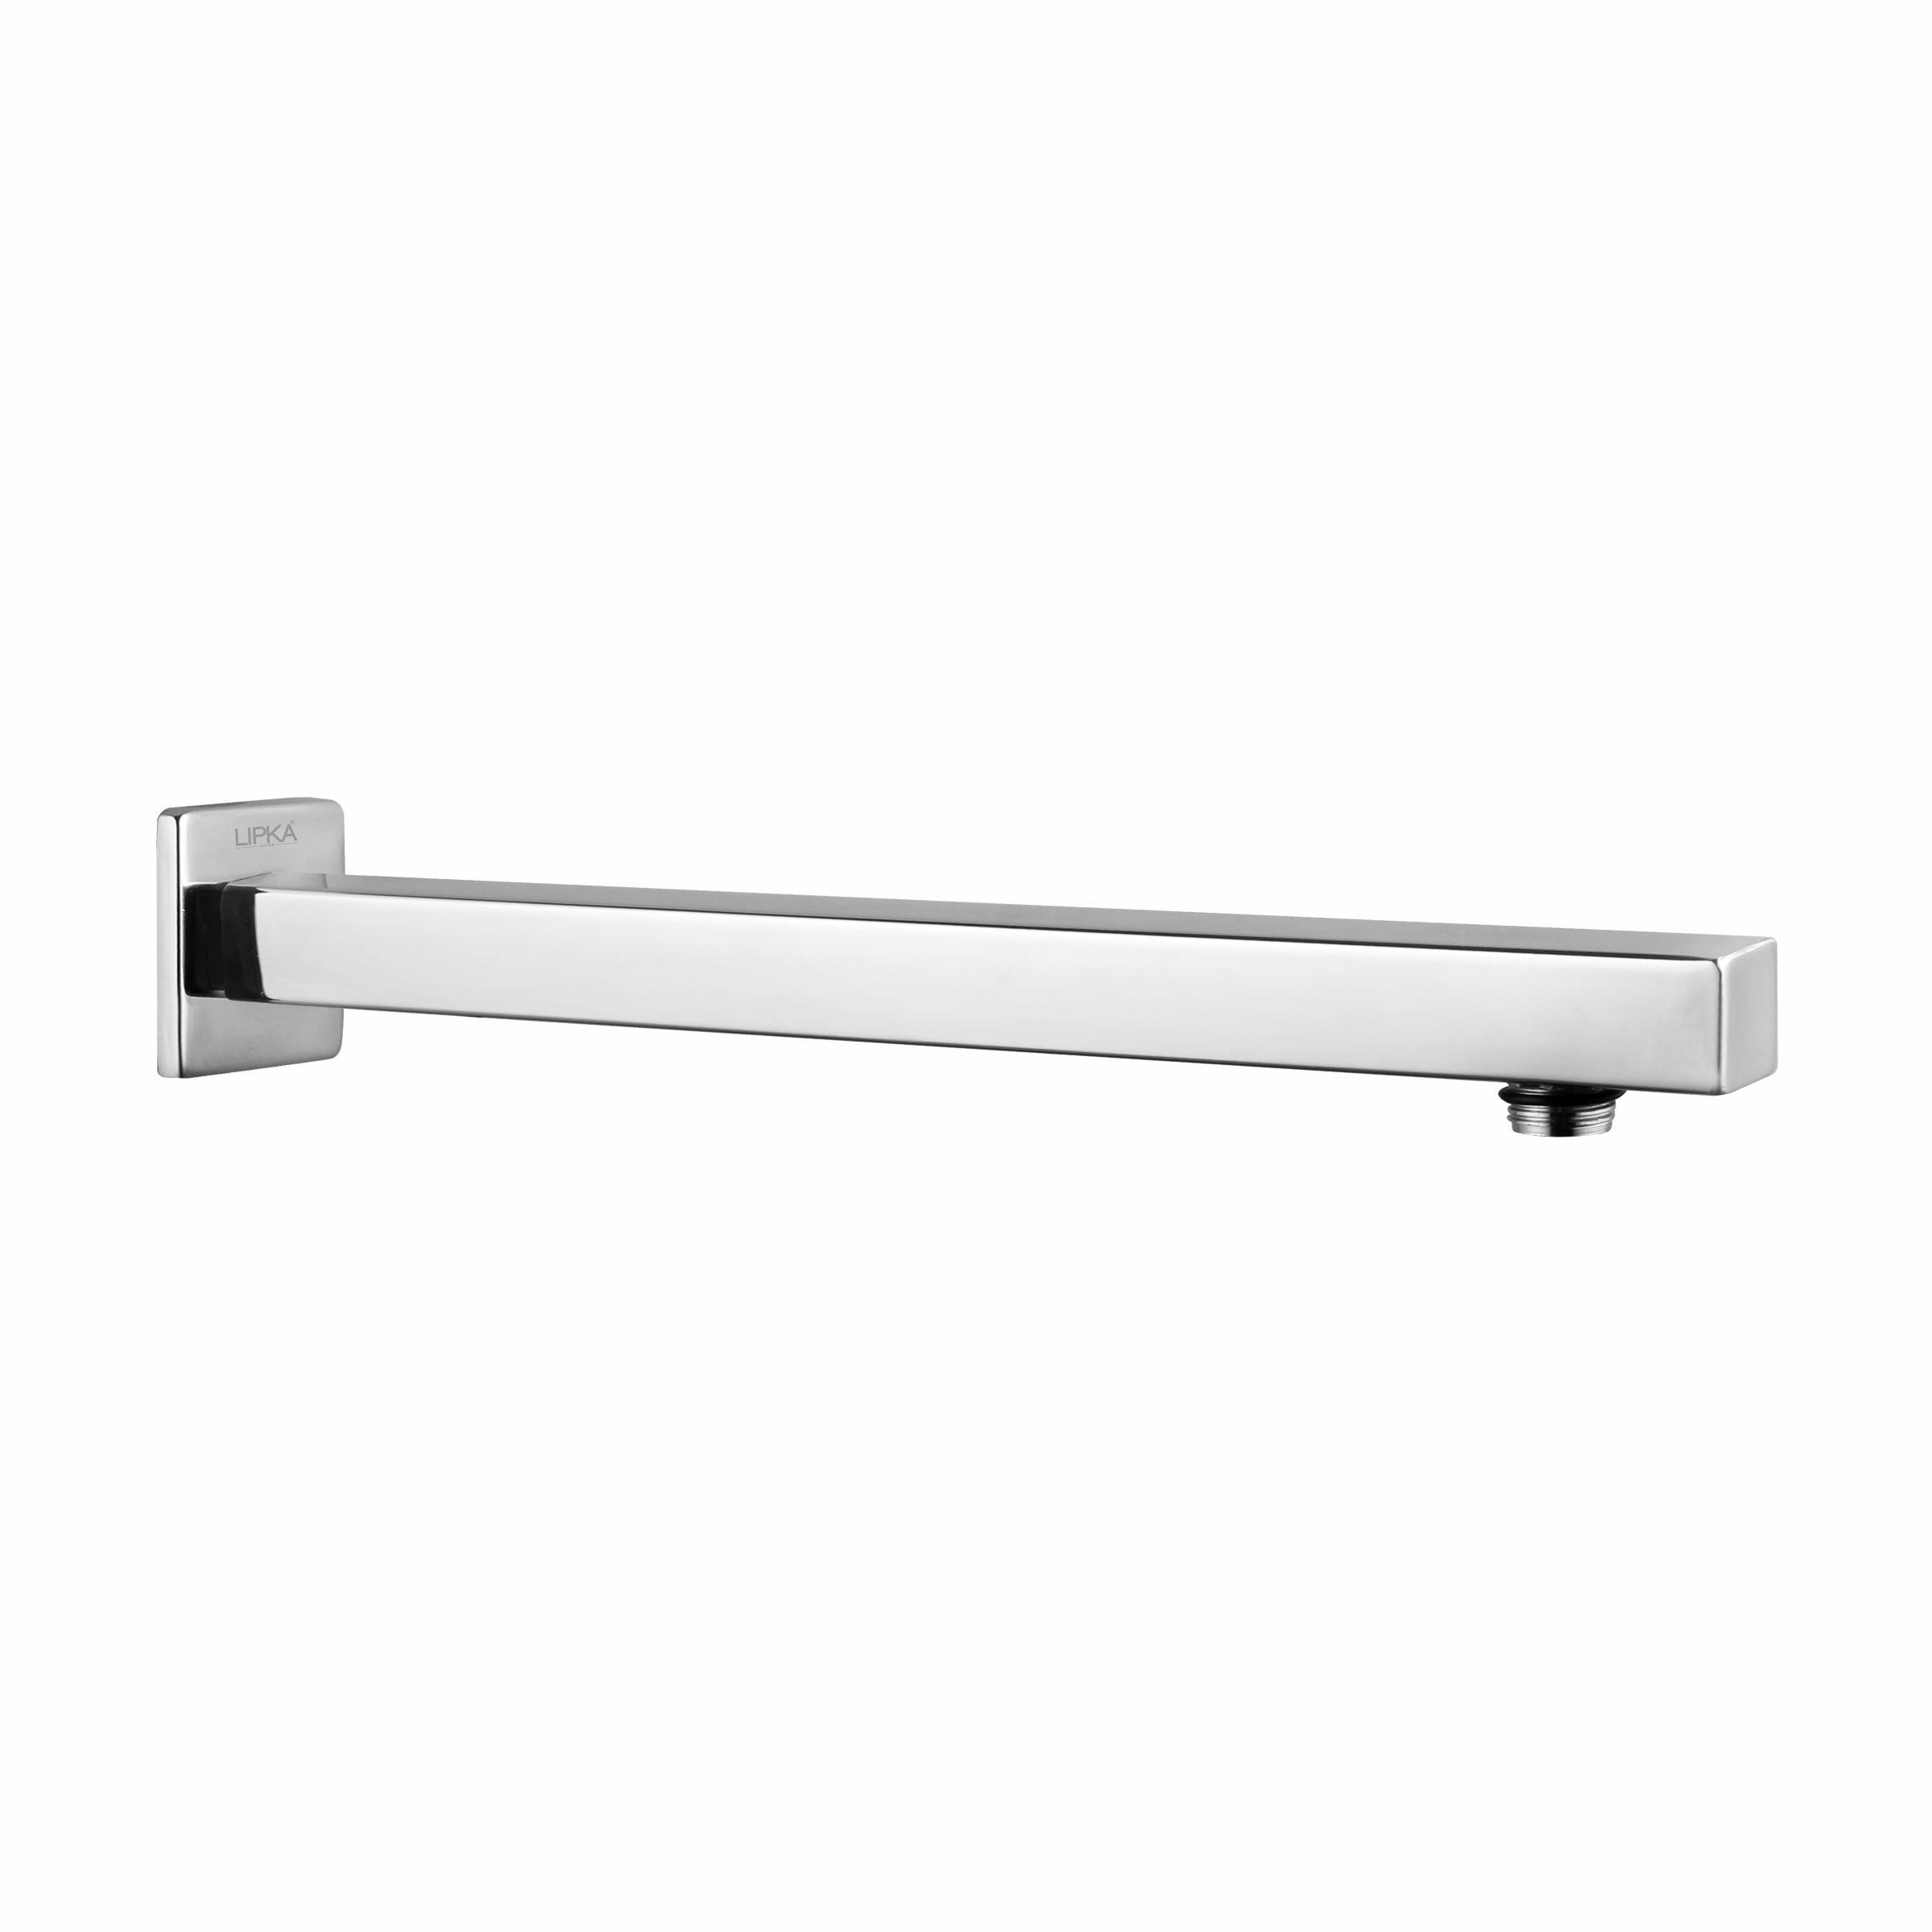 Square Shower Arm (15 Inches)